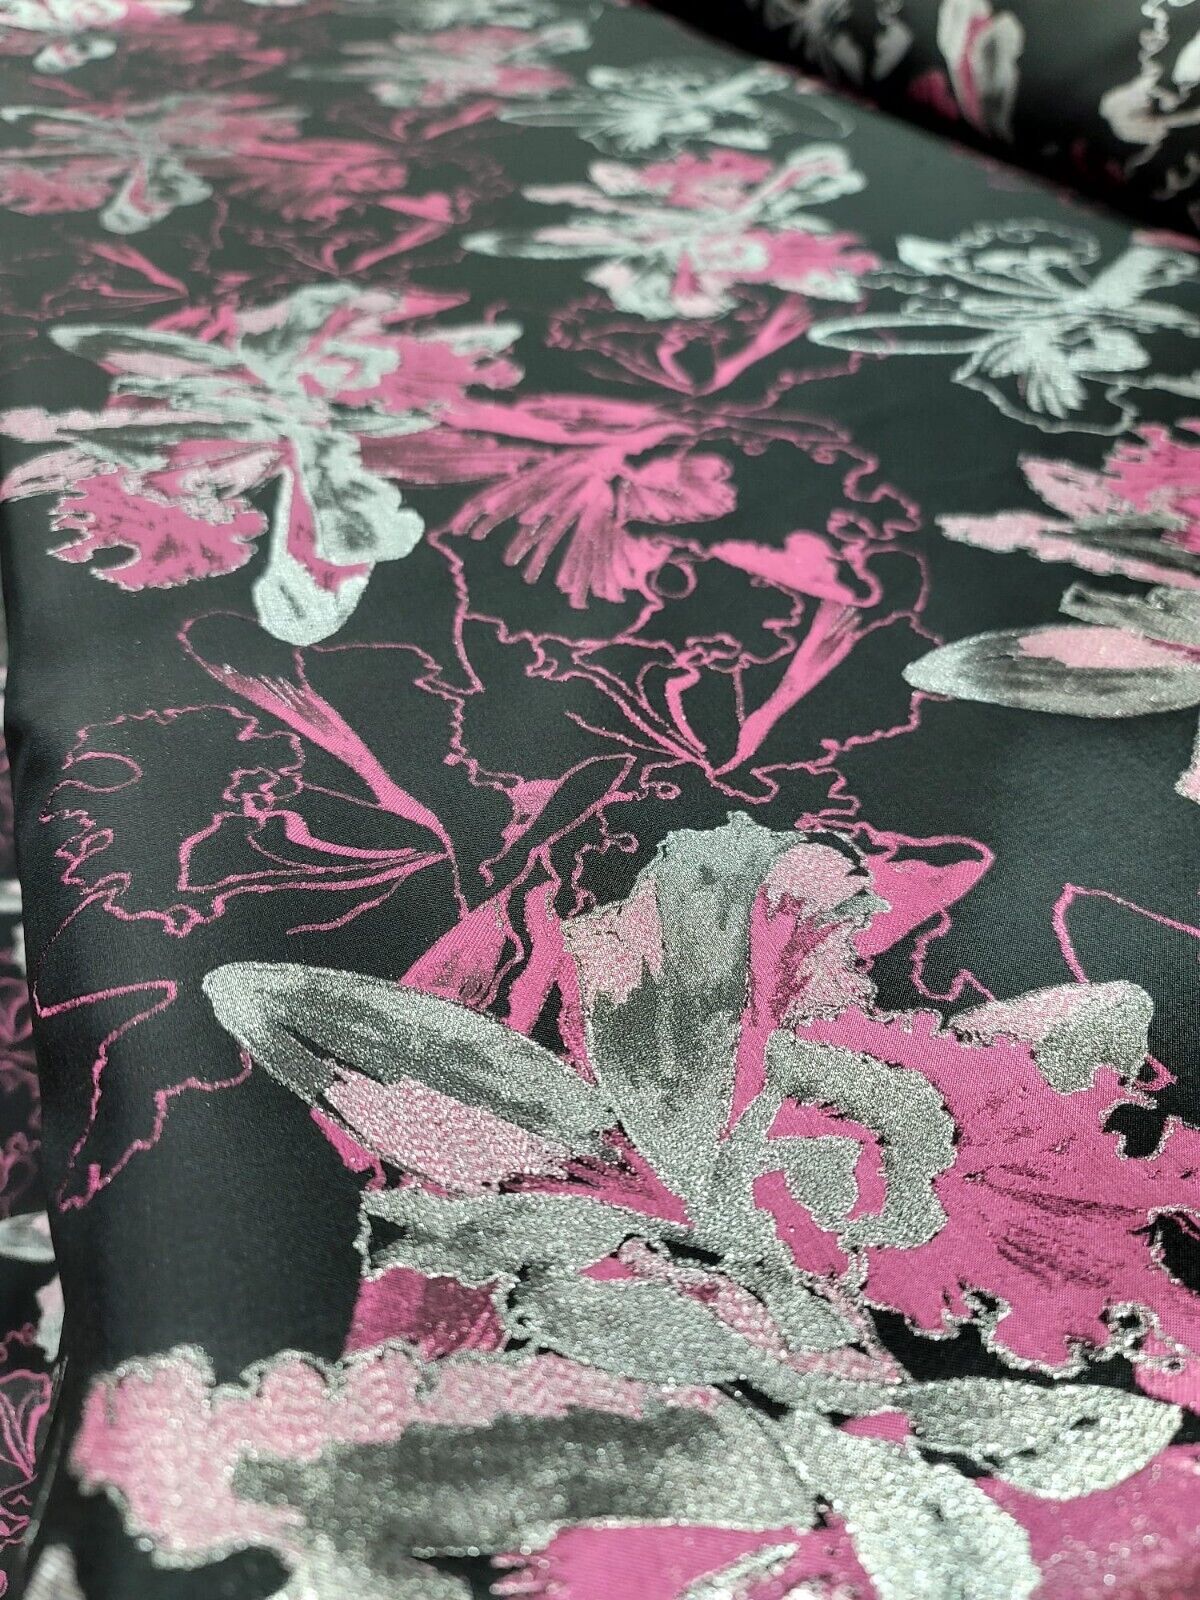 Pink Fuchsia Silver and Black Damask Jacquard Brocade Floral Fabric - 60" Width